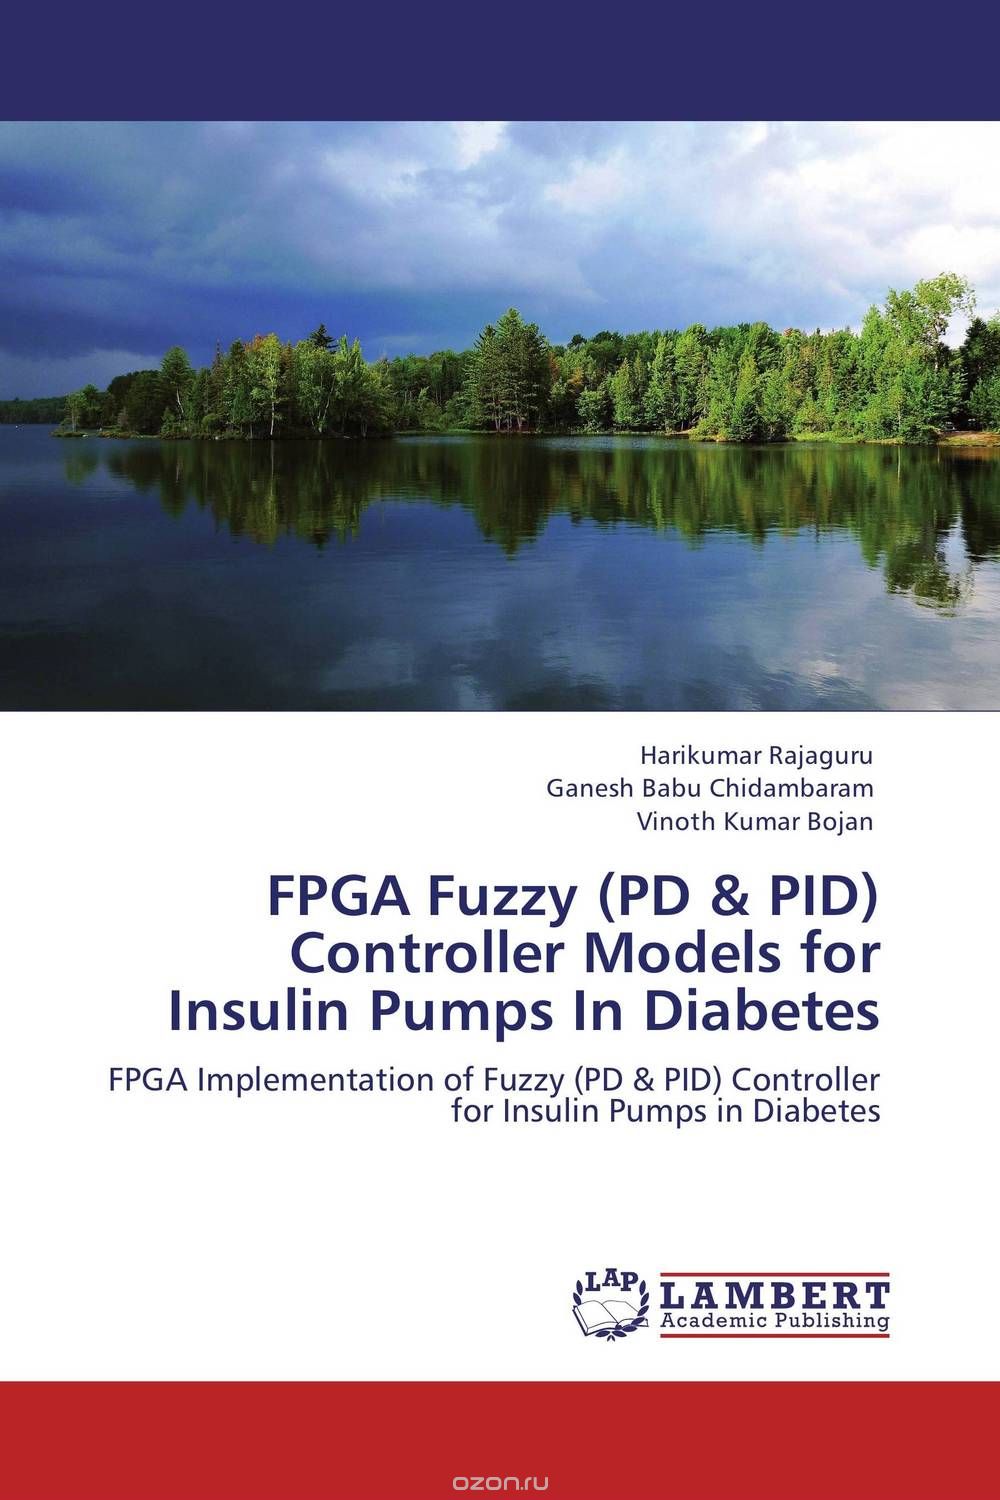 FPGA Fuzzy (PD & PID) Controller Models for Insulin Pumps In Diabetes